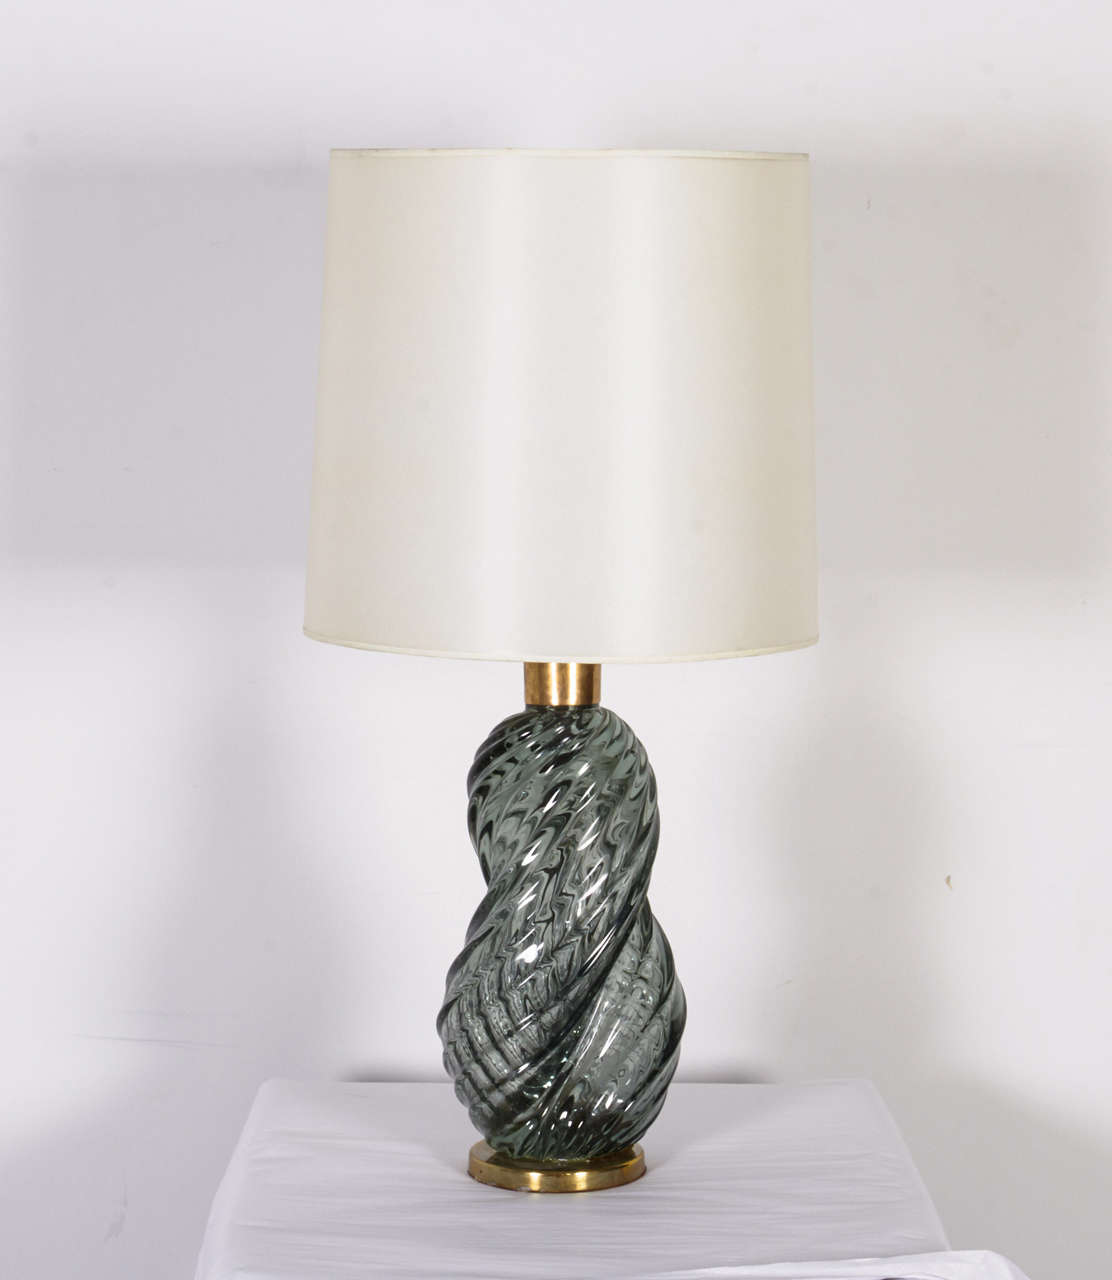 Murano glass table lamp with bronze fittings, by Venini ,Murano Italy, 1940.
4 1/2